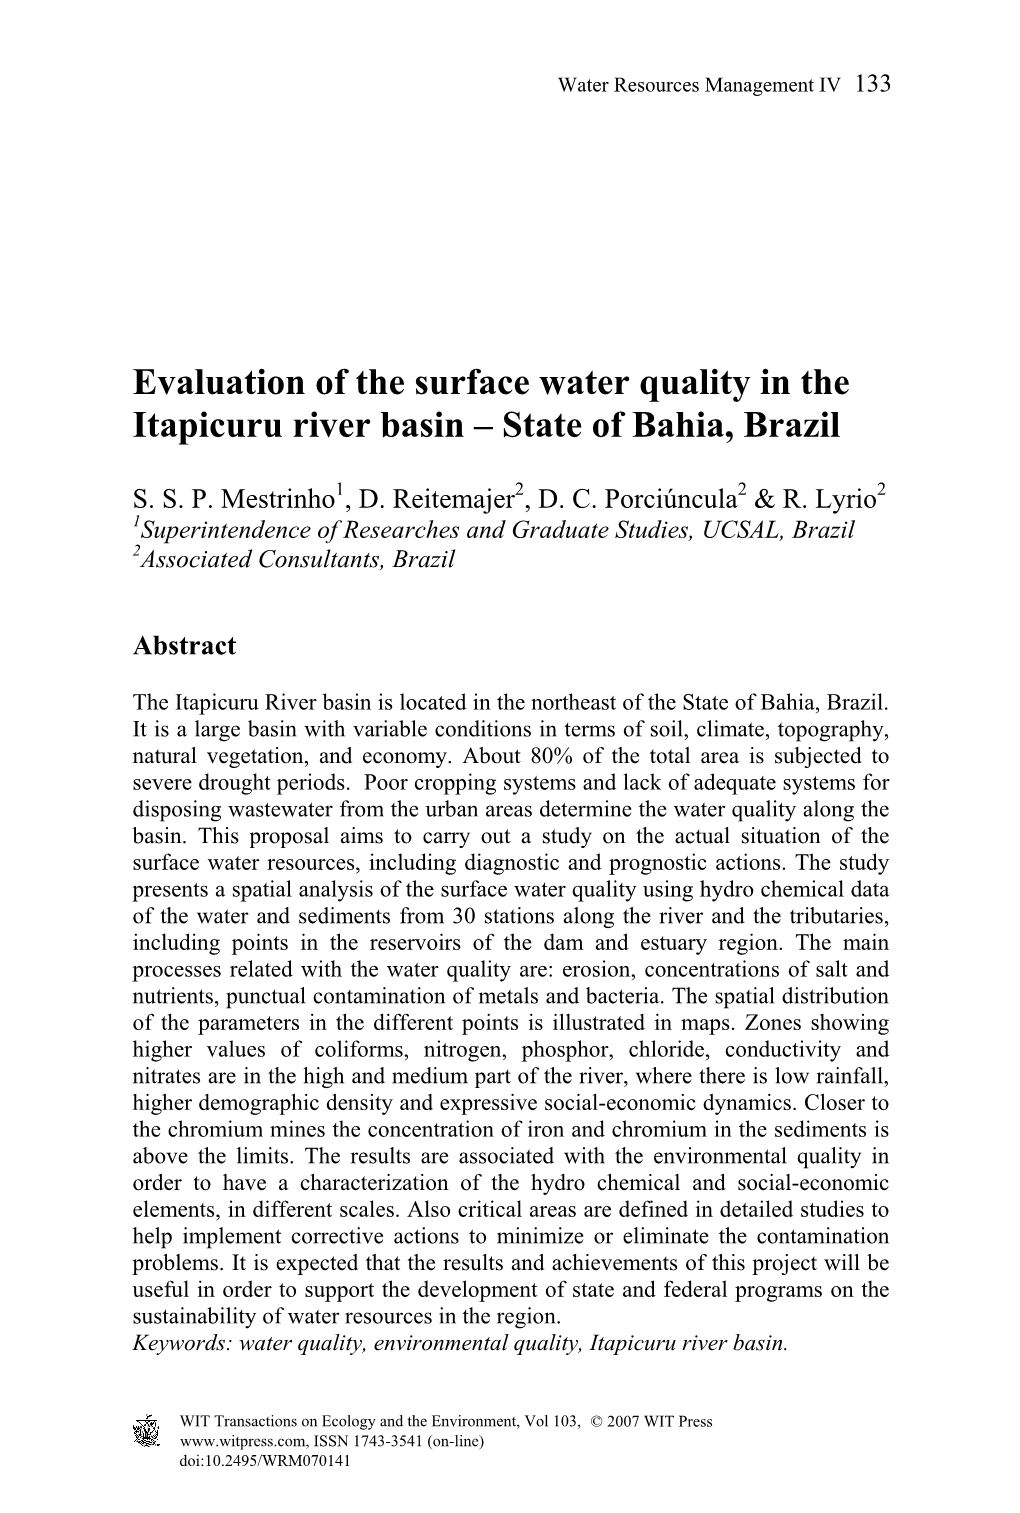 Evaluation of the Surface Water Quality in the Itapicuru River Basin – State of Bahia, Brazil